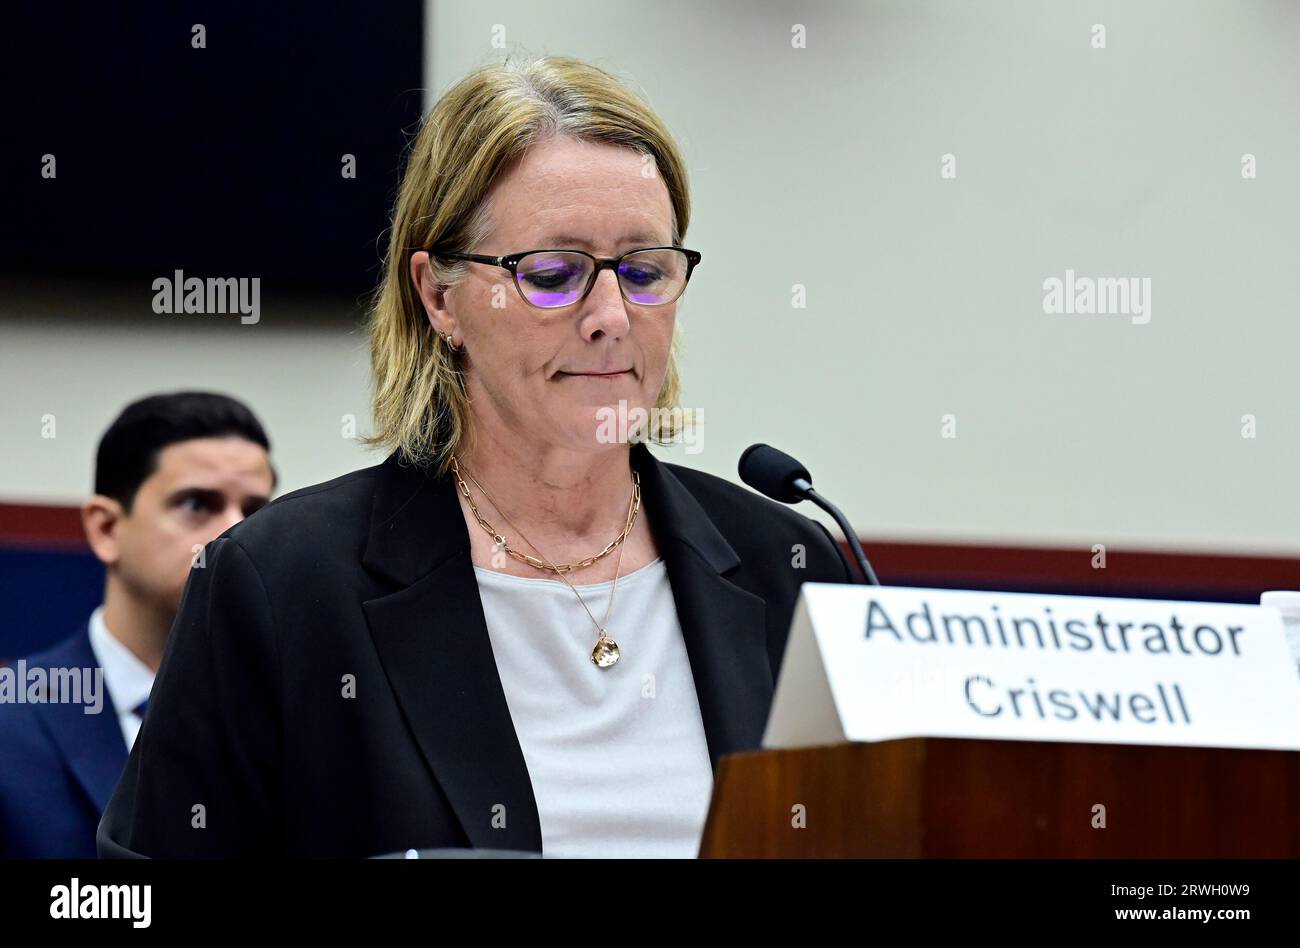 Washington, Vereinigte Staaten. 19 settembre 2023. Deanne Criswell, Amministratore, Federal Emergency Management Agency (FEMA) testimonia davanti alla United States House Committee on Transportation & Infrastructure Hearing âFEMA: The Current State of Disaster Readiness, Response, and Recoveryâ nel Rayburn House Office Building a Capitol Hill a Washington, DC martedì 19 settembre 2023. Credito: Ron Sachs/CNP/dpa/Alamy Live News Foto Stock